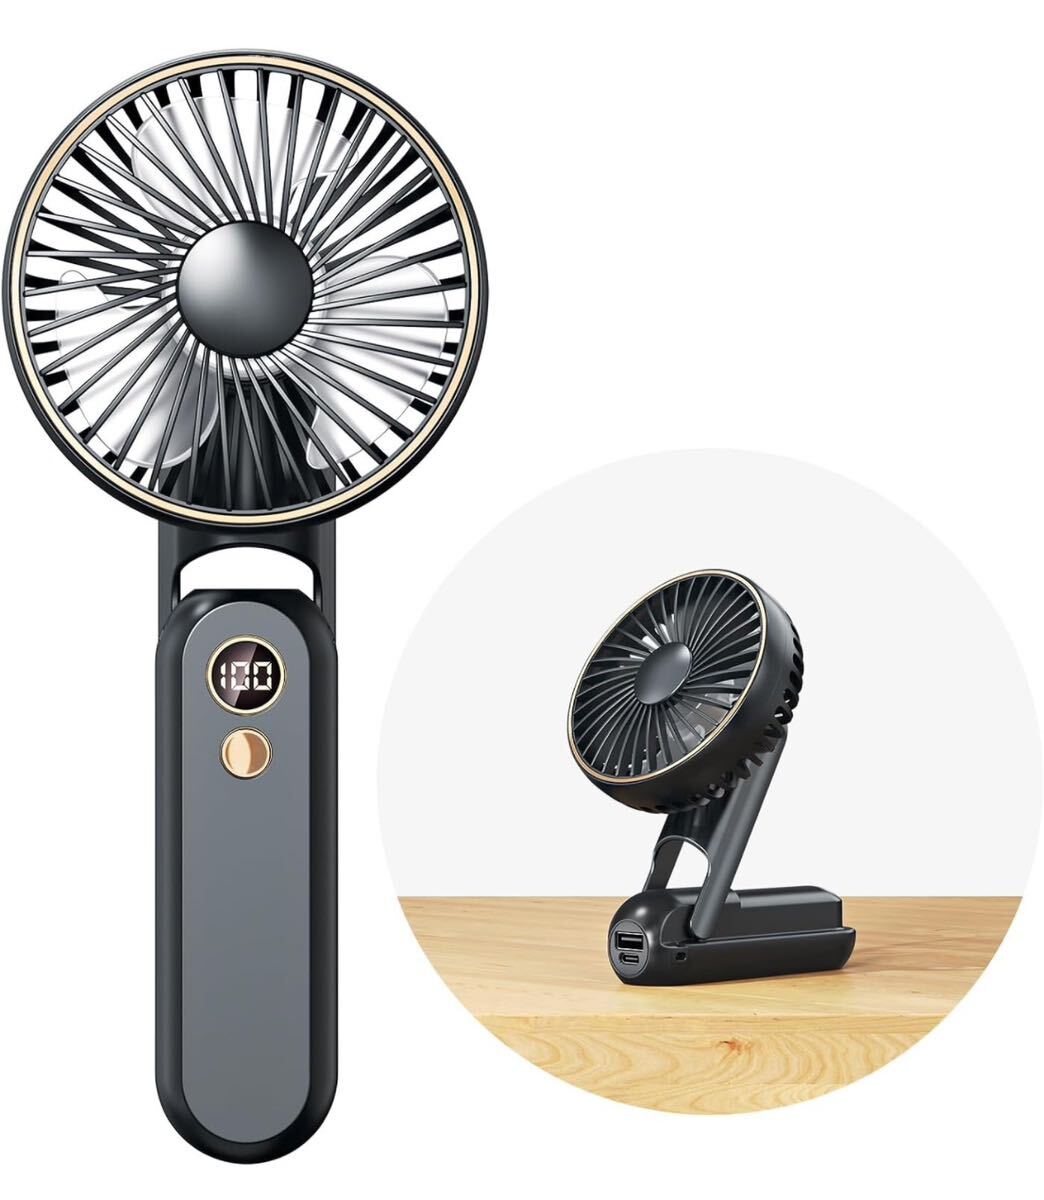  handy fan handy electric fan in stock electric fan 20dB quiet sound mobile electric fan 3000mAh battery built-in maximum 24 hour continuation use 5 -step air flow adjustment black 